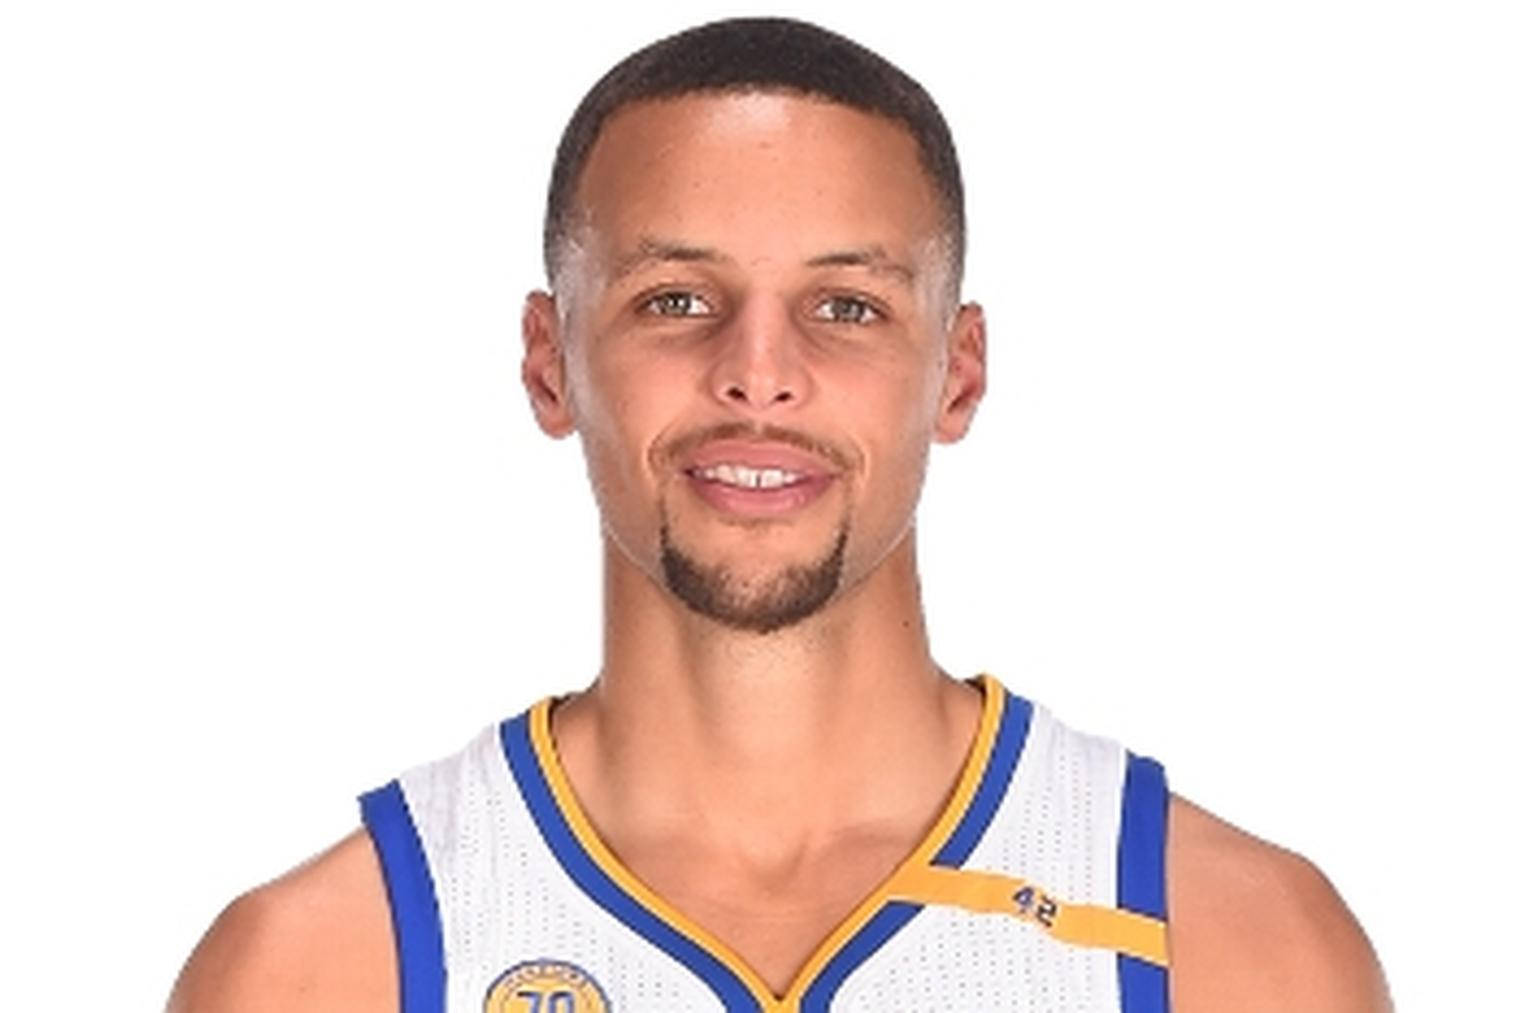 Headshot Photo Of Steph Curry Wallpaper